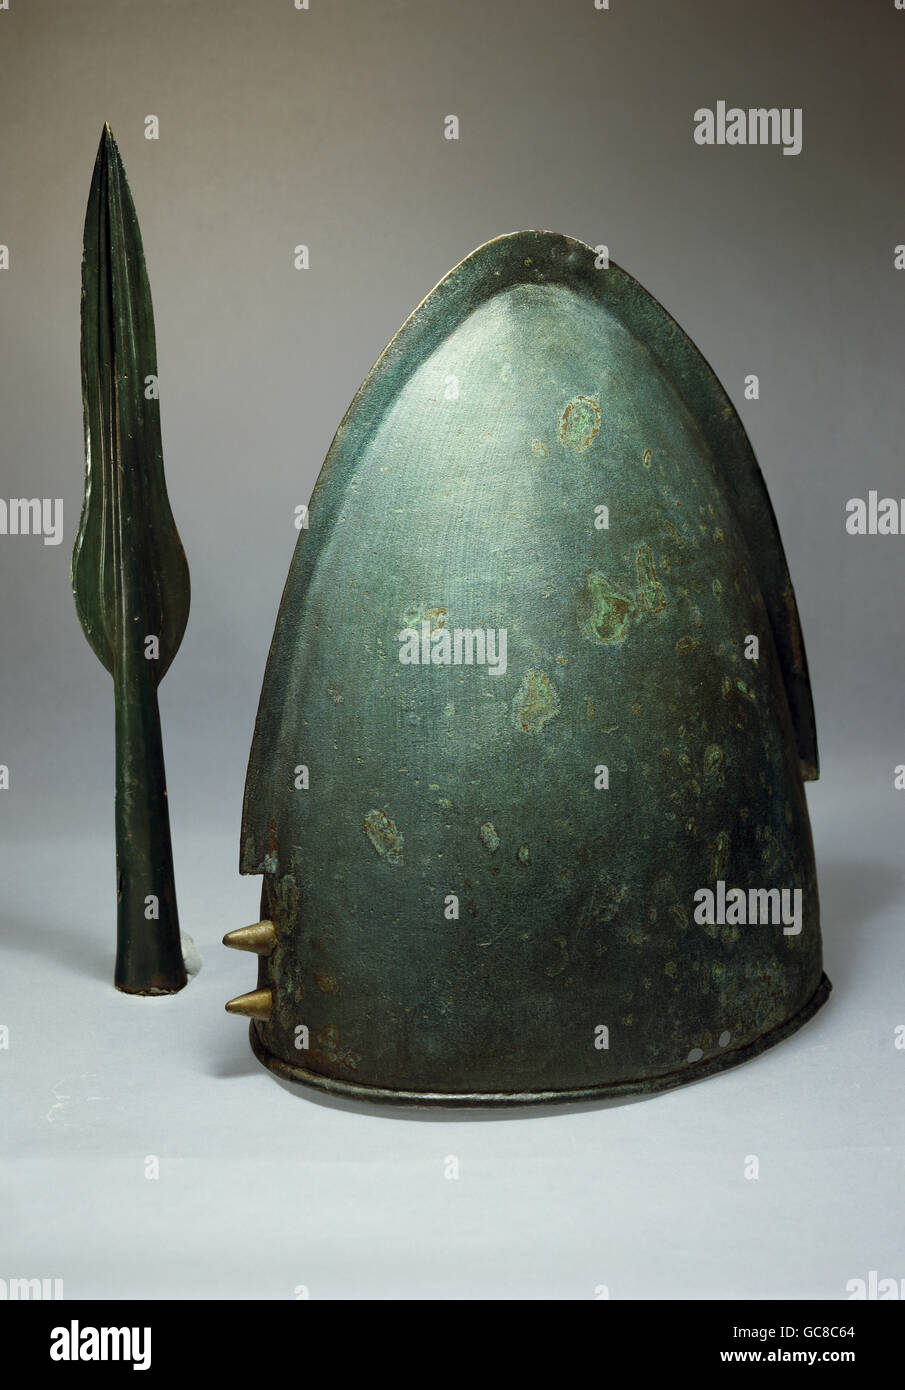 fine arts, ancient world, bronze age, sculpture, helm and spearhead, bronze, Krottental, Germany, urnfield culture, 1300 - 700 BC, Munich Prehistoric Collection, Stock Photo